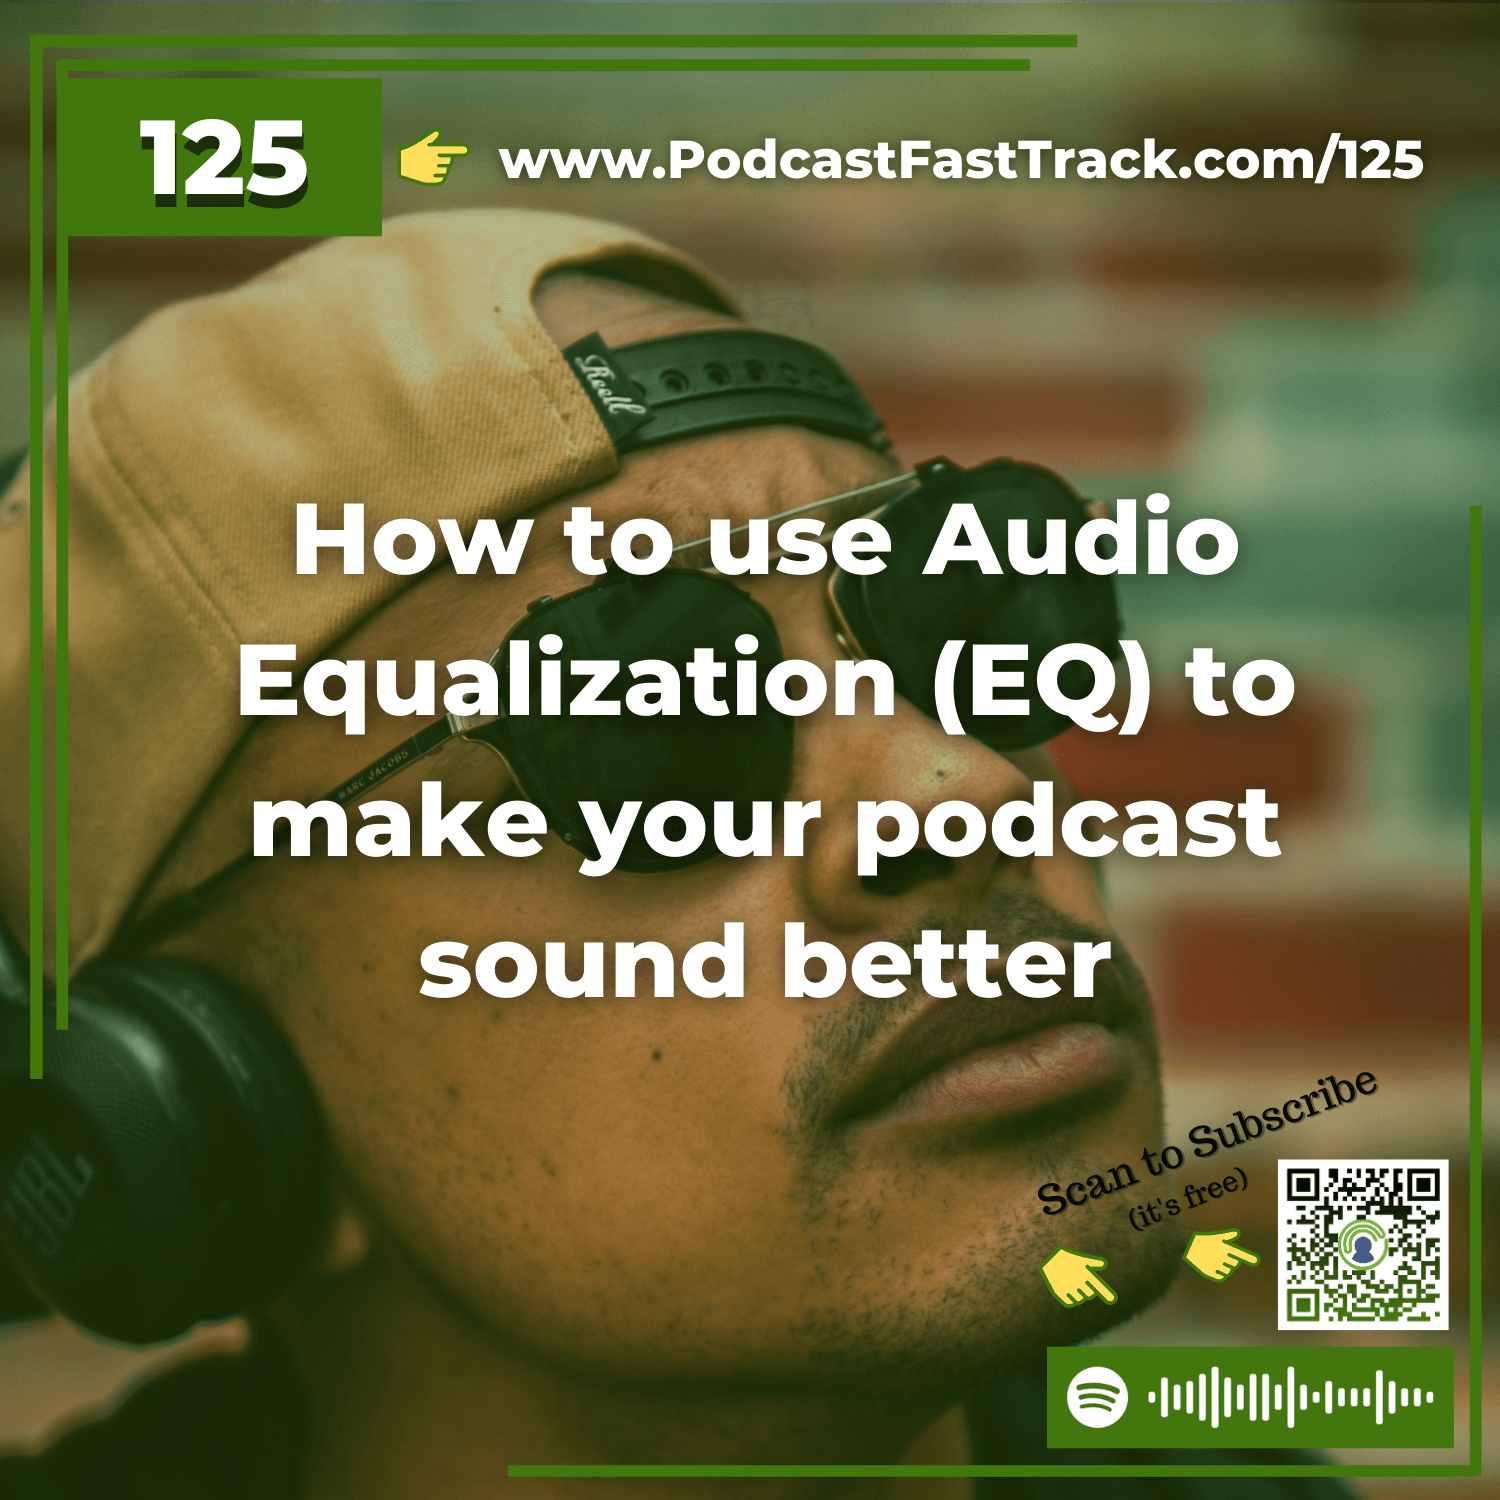 125: How to use Audio Equalization (EQ) to make your podcast sound better